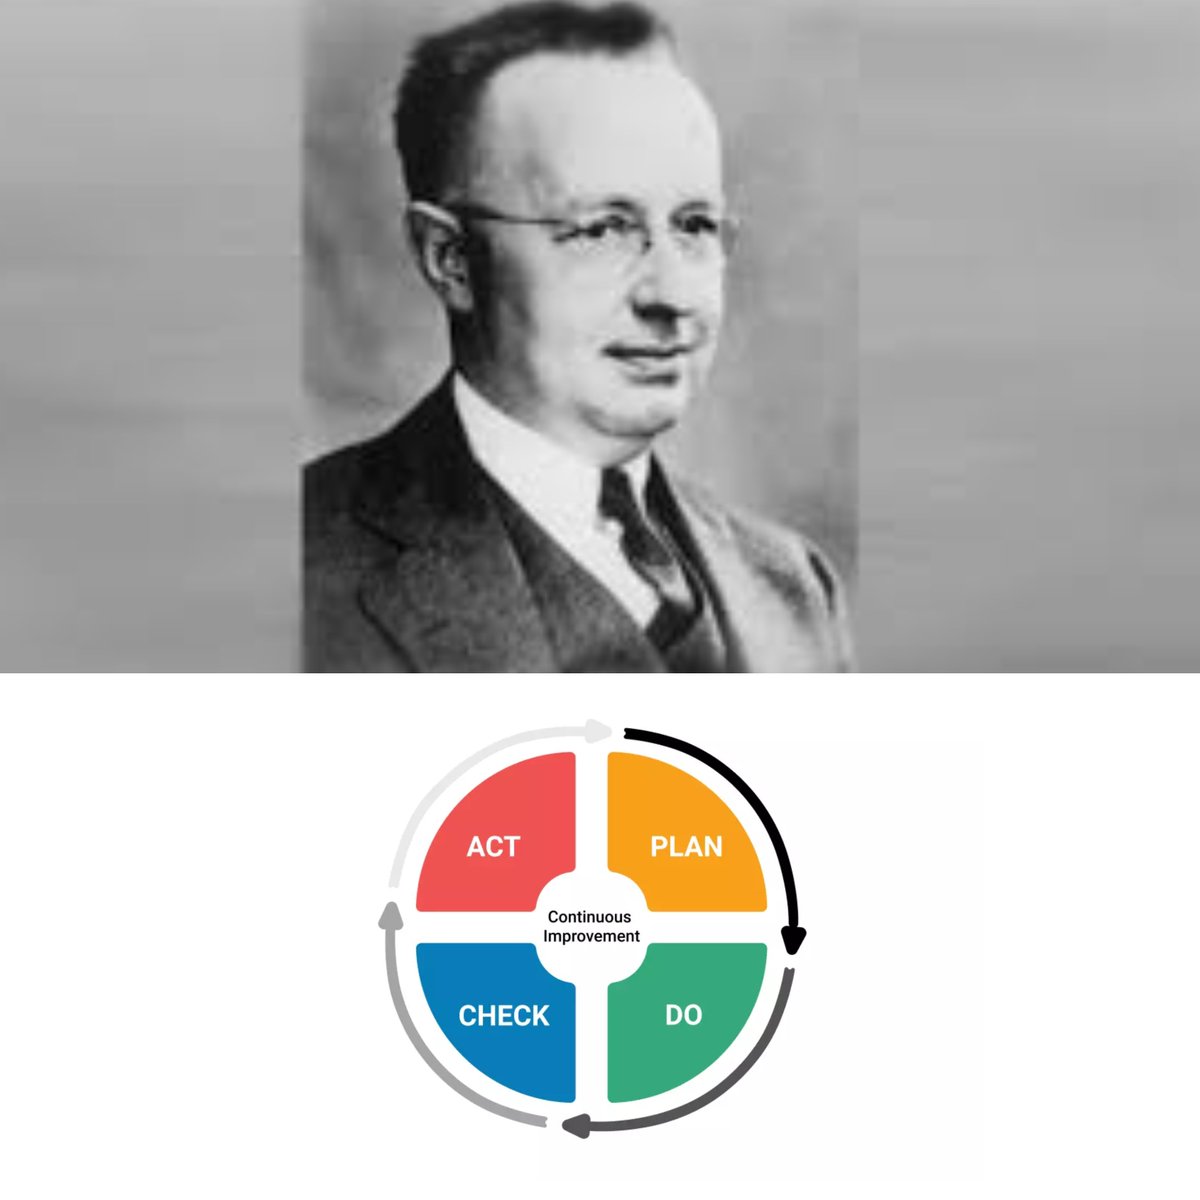 1930: American statistician and engineer called Walter Shewhart while working for Bell Labs created the ‘Shewhart Cycle’ 

This system is now most commonly known as the PDCA Cycle 

Plan, Do, Check, Act. You make a plan, carry it out, analyze & act on insights to improve. Simple.